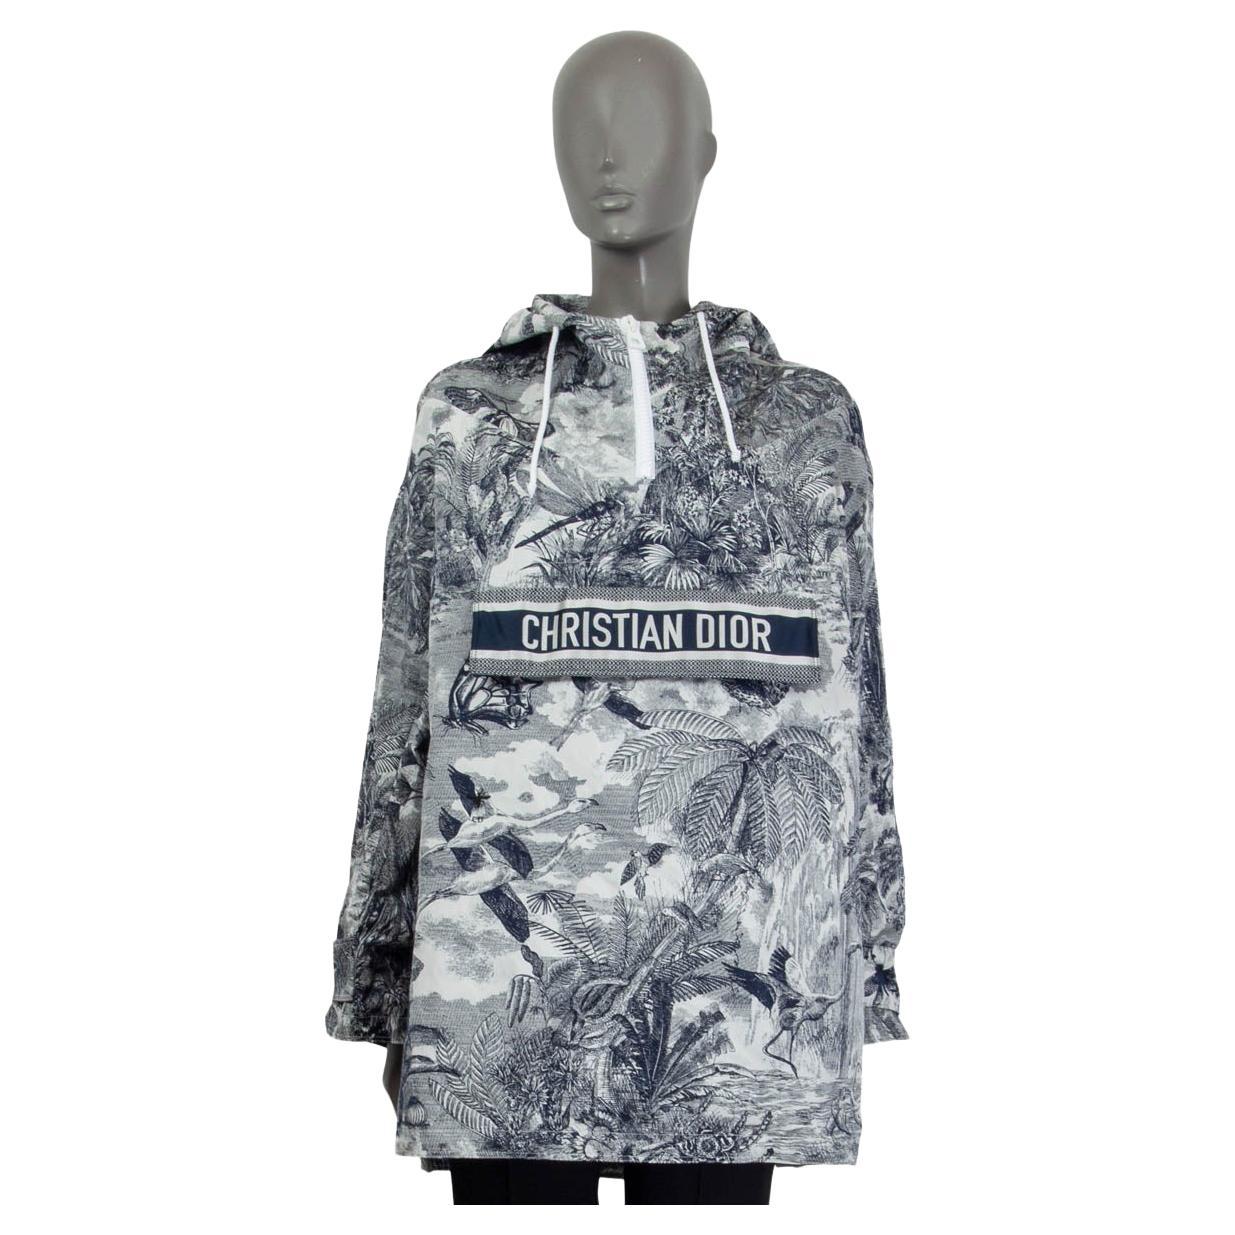 Dior Toile De Jouy - 9 For Sale on 1stDibs